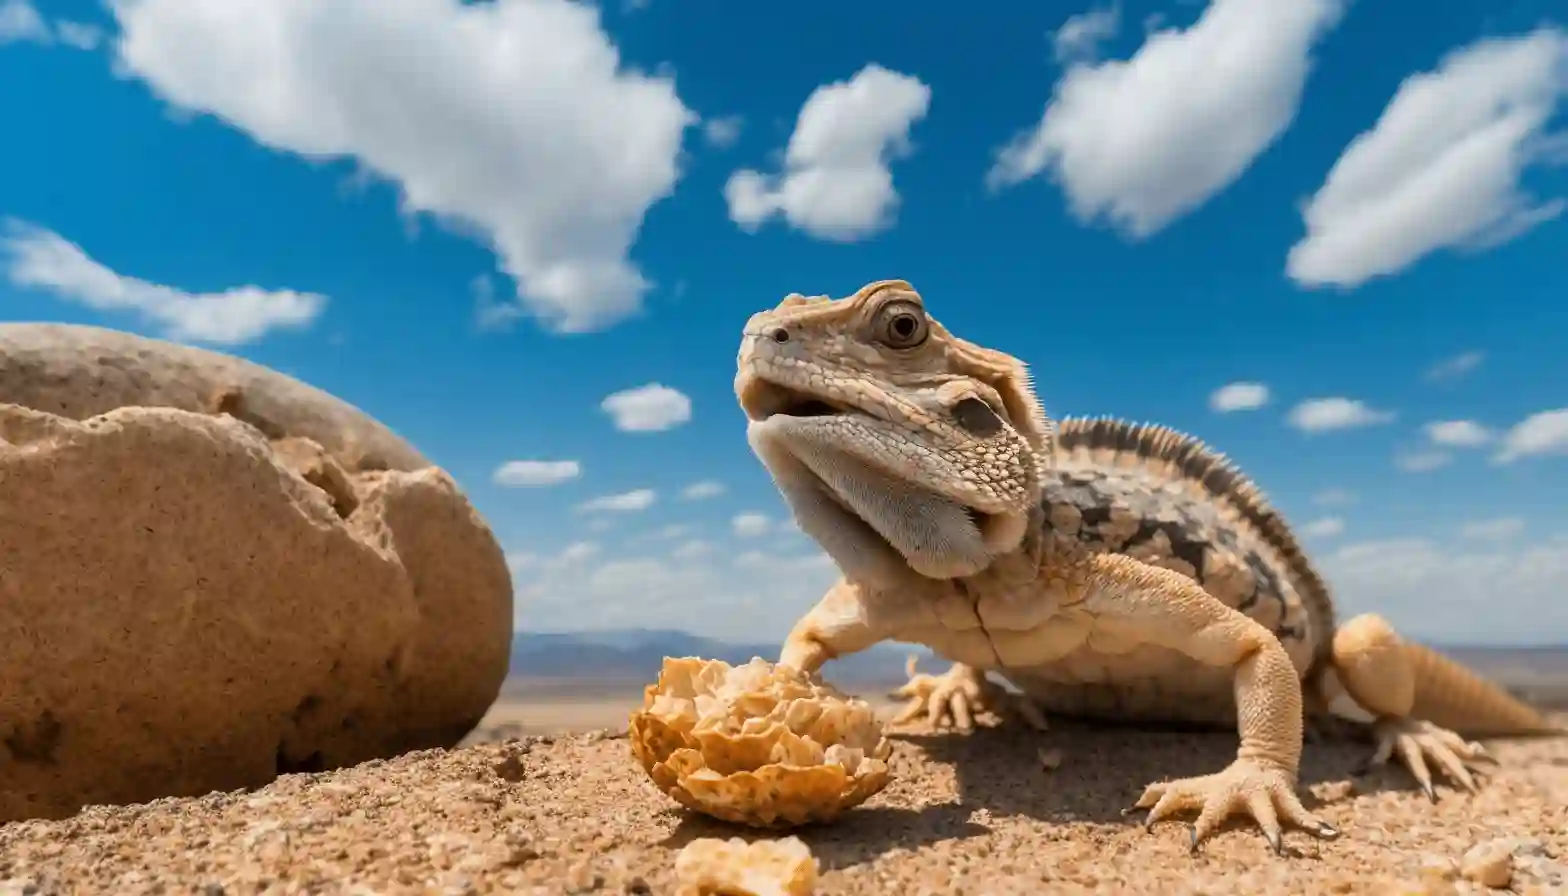 Can Bearded Dragons Eat Walnuts?